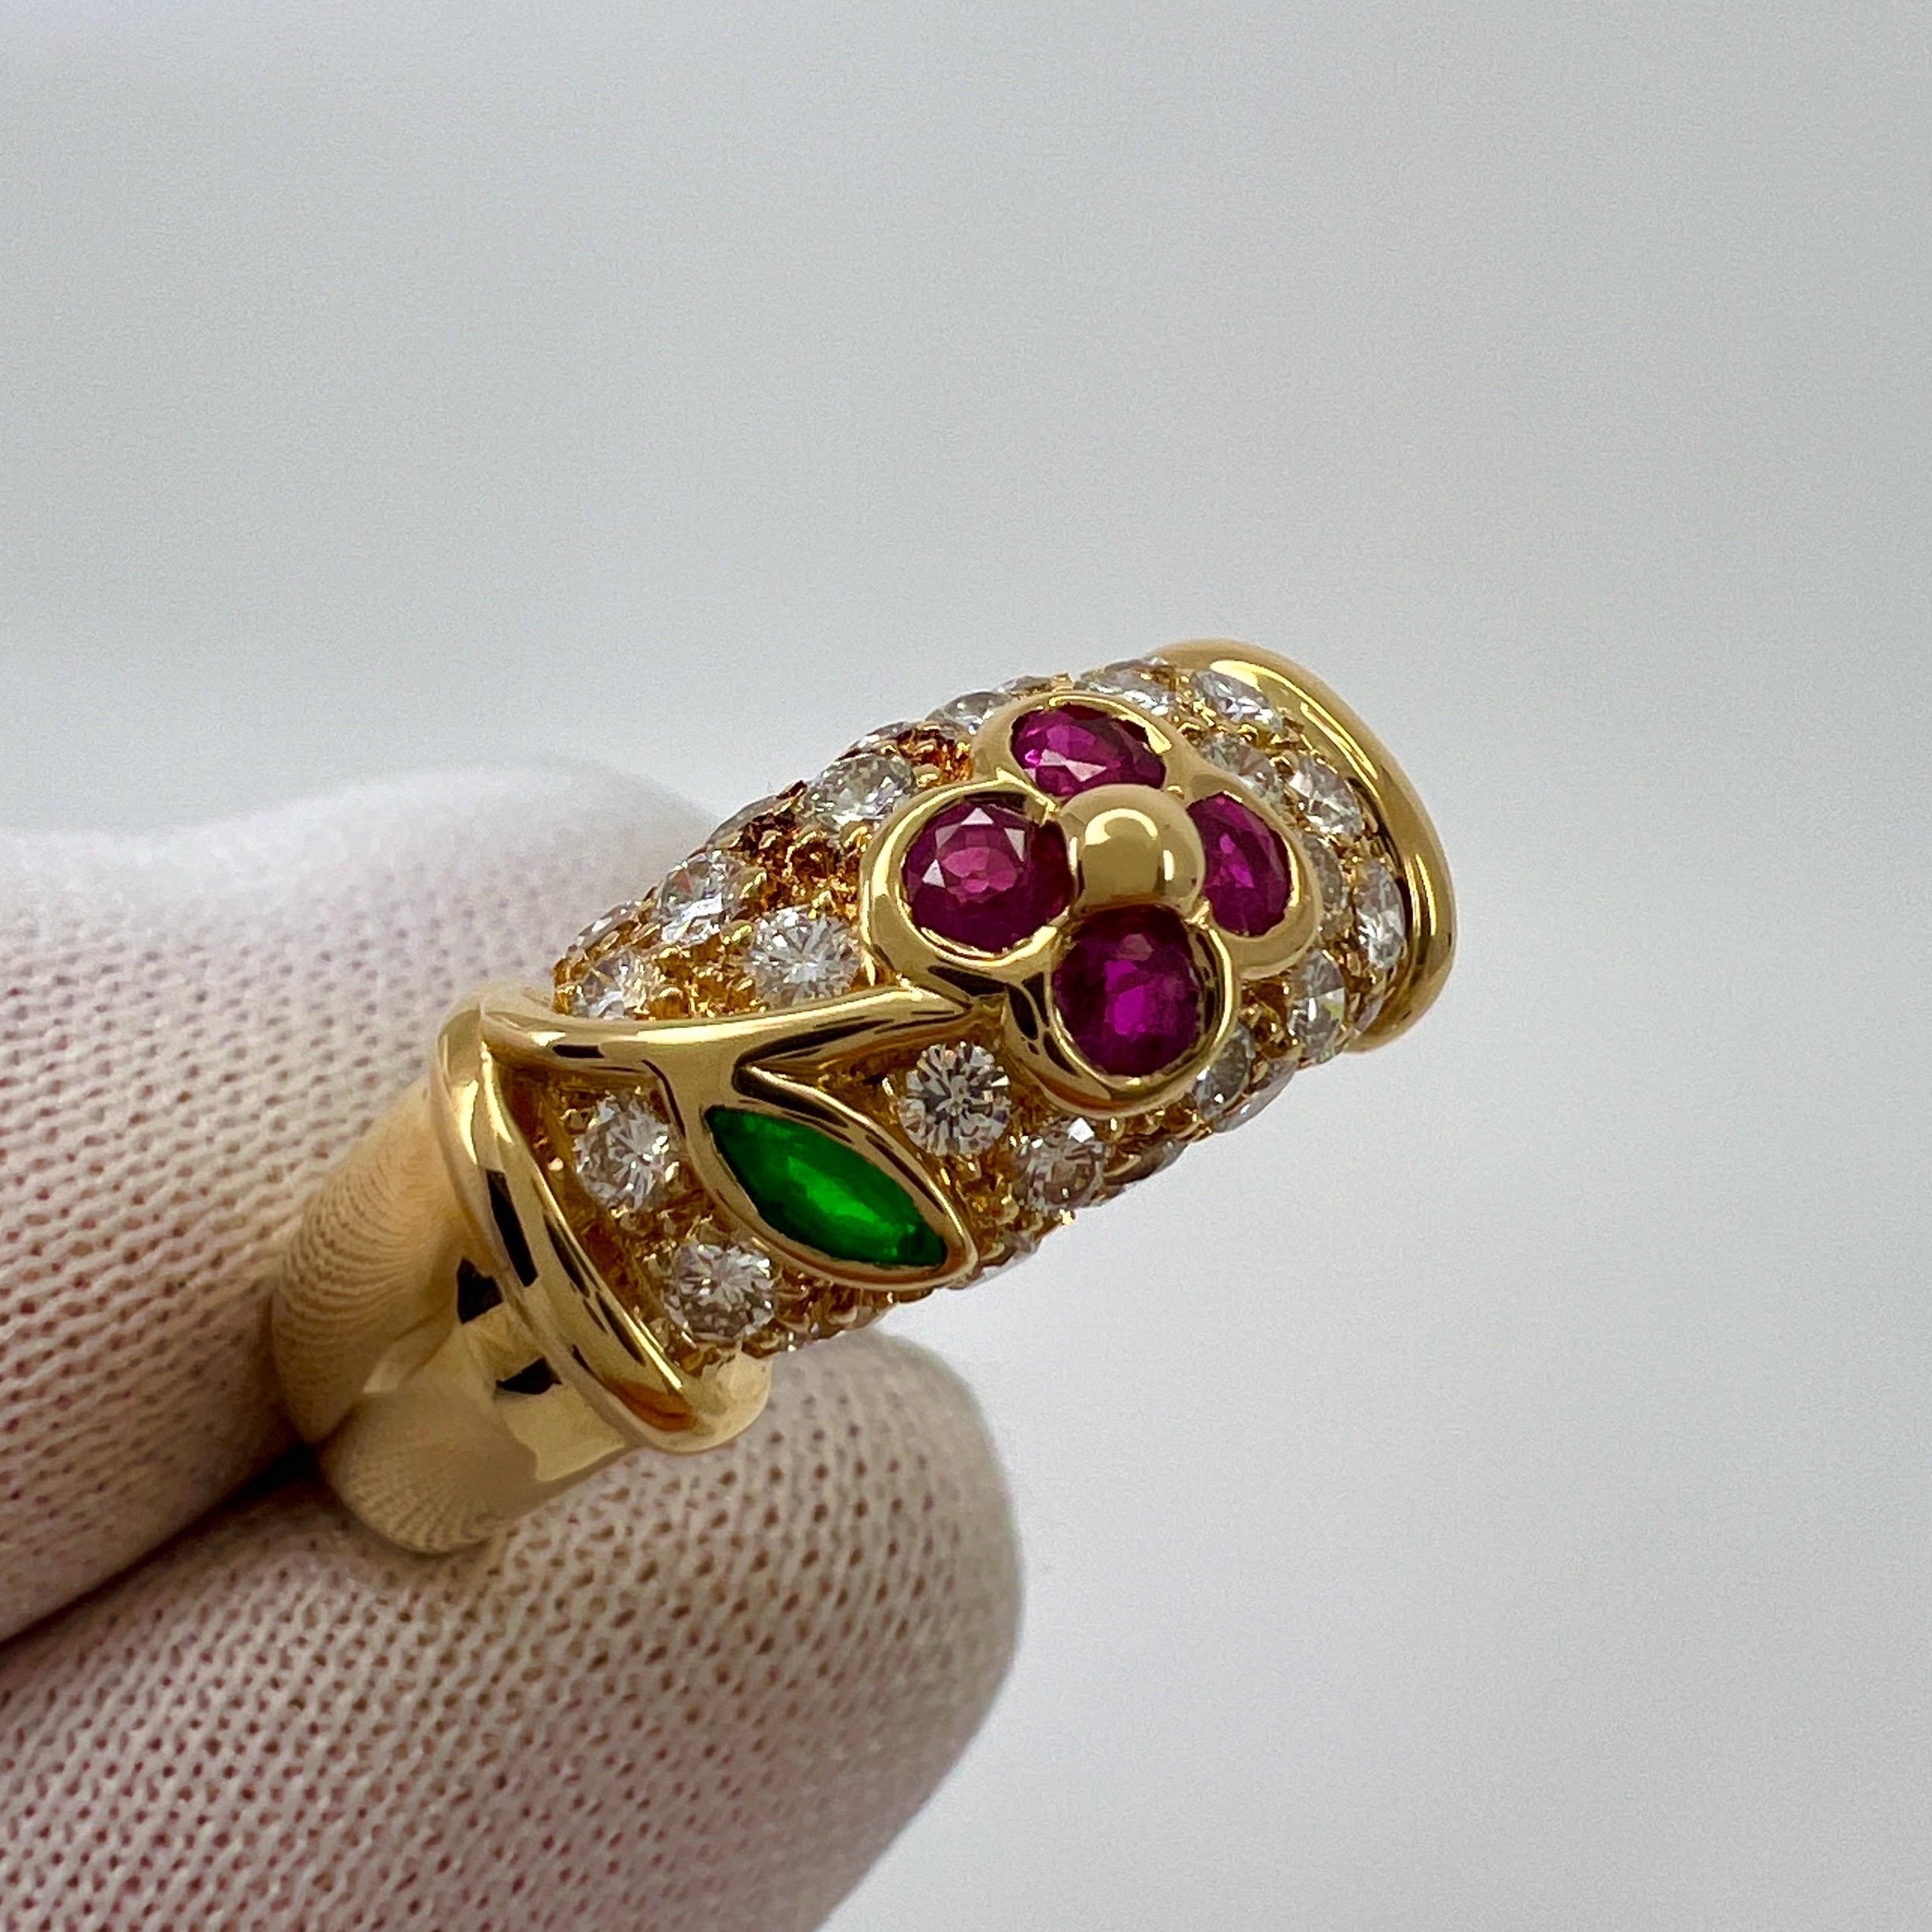 Rare Van Cleef & Arpels Ruby Emerald Diamond 18k Yellow Gold Floral Flower Ring For Sale 6